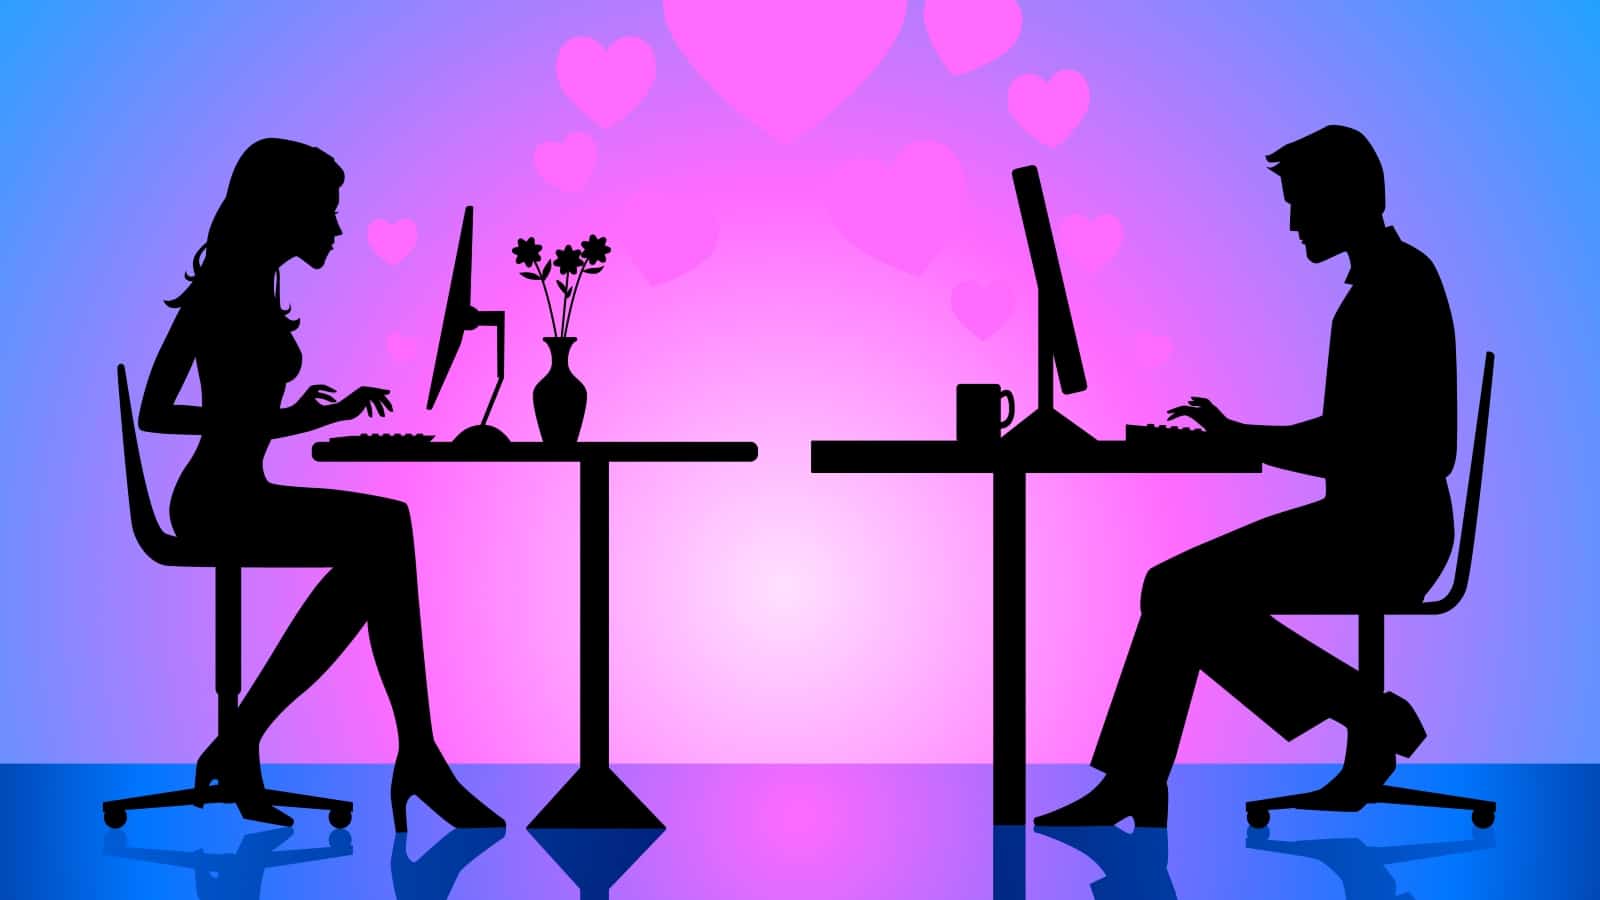 Silhouettes couple at a computer, showcasing the popularity and potential positive impact of online dating.